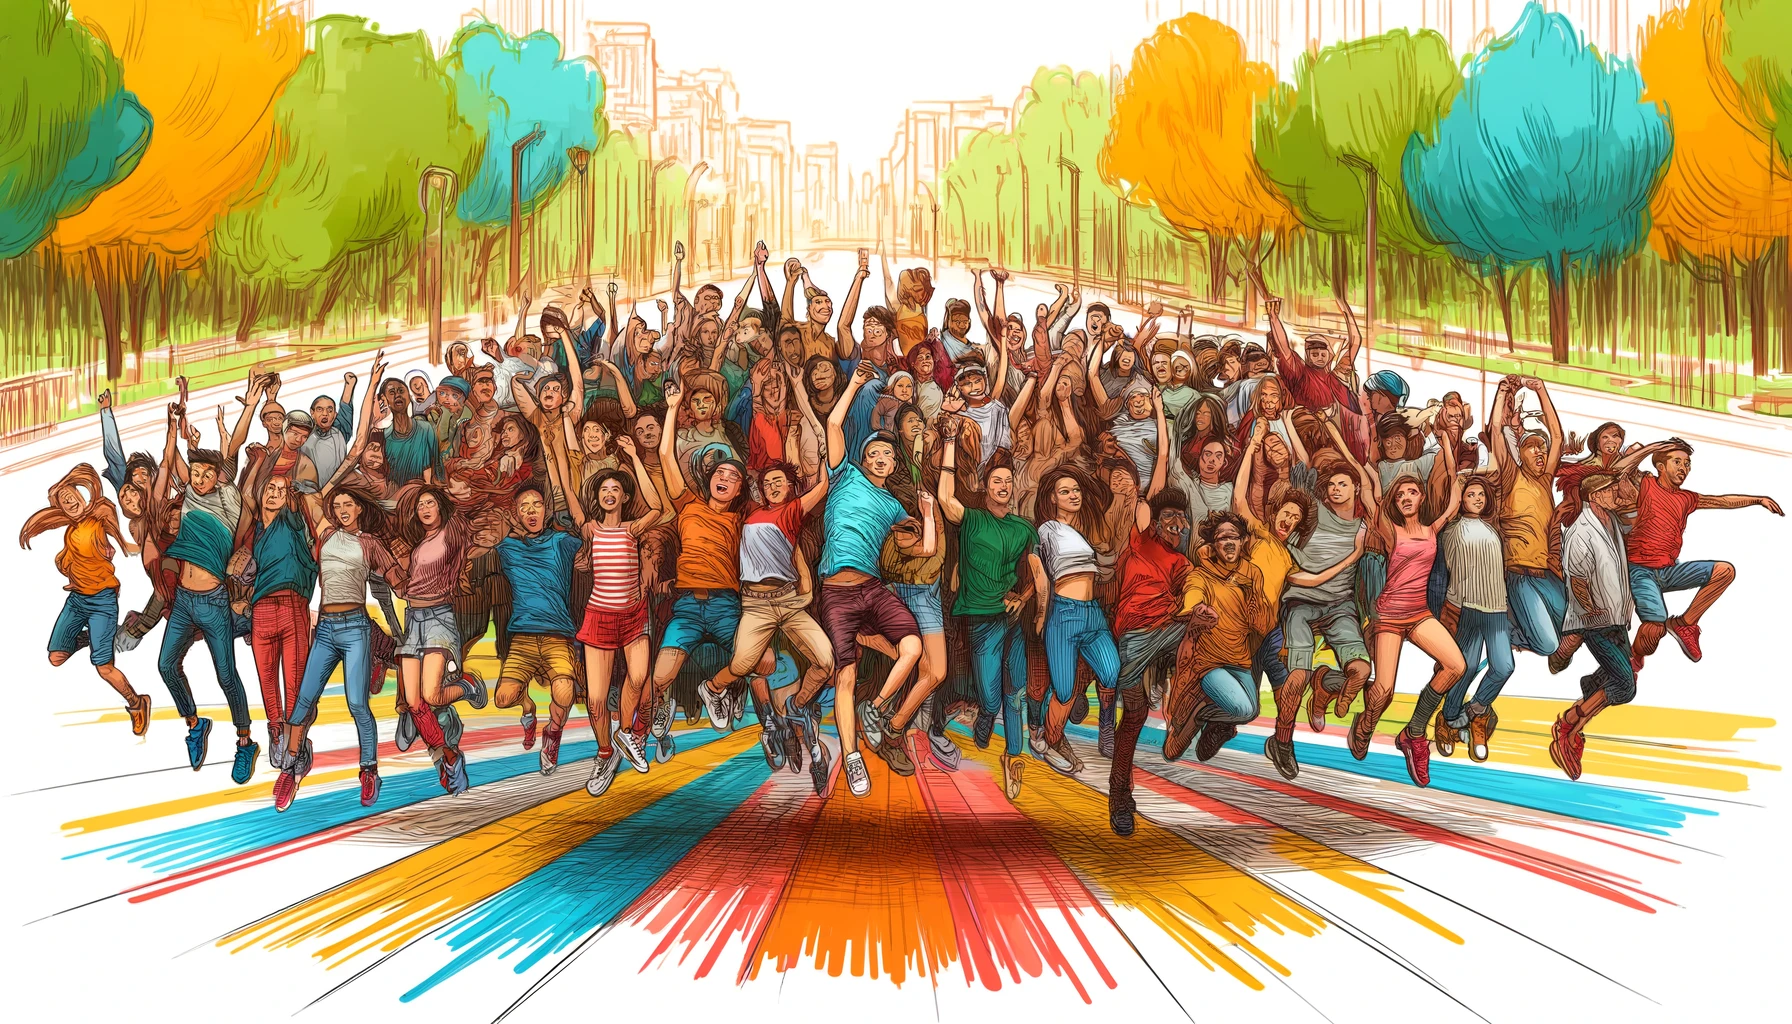 A lively drawing depicting a large group of one hundred diverse individuals, all captured mid-jump, not exceeding 0.5 meters above the ground, in a stylized, hand-drawn format. The setting is a colorful urban park with detailed sketches of trees and pathways. The characters, representing various ethnicities and ages, are wearing a mix of sporty and casual outfits, drawn with vibrant colors and bold lines. The drawing style is energetic and expressive, emphasizing the joyful and communal nature of the scene.